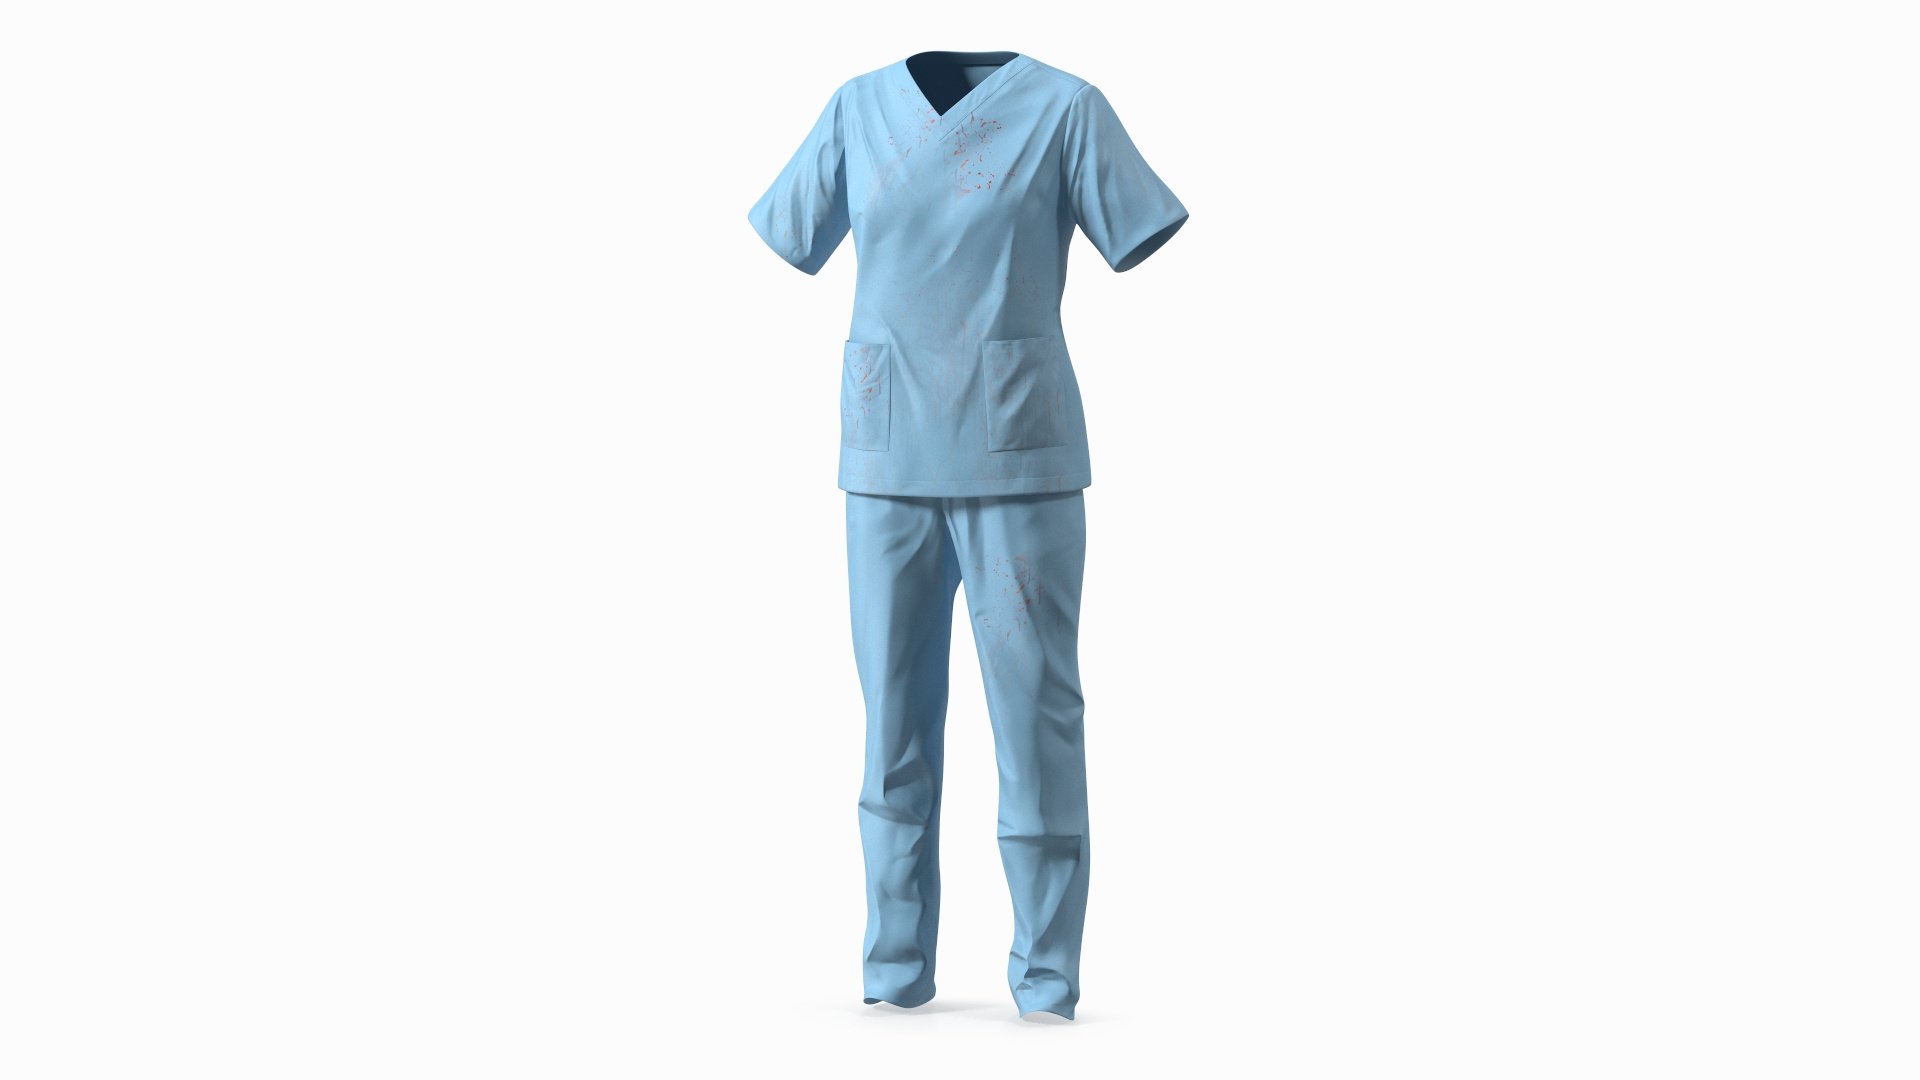 Medical Scrubs Uniform With Stains 3D Model - TurboSquid 2191887